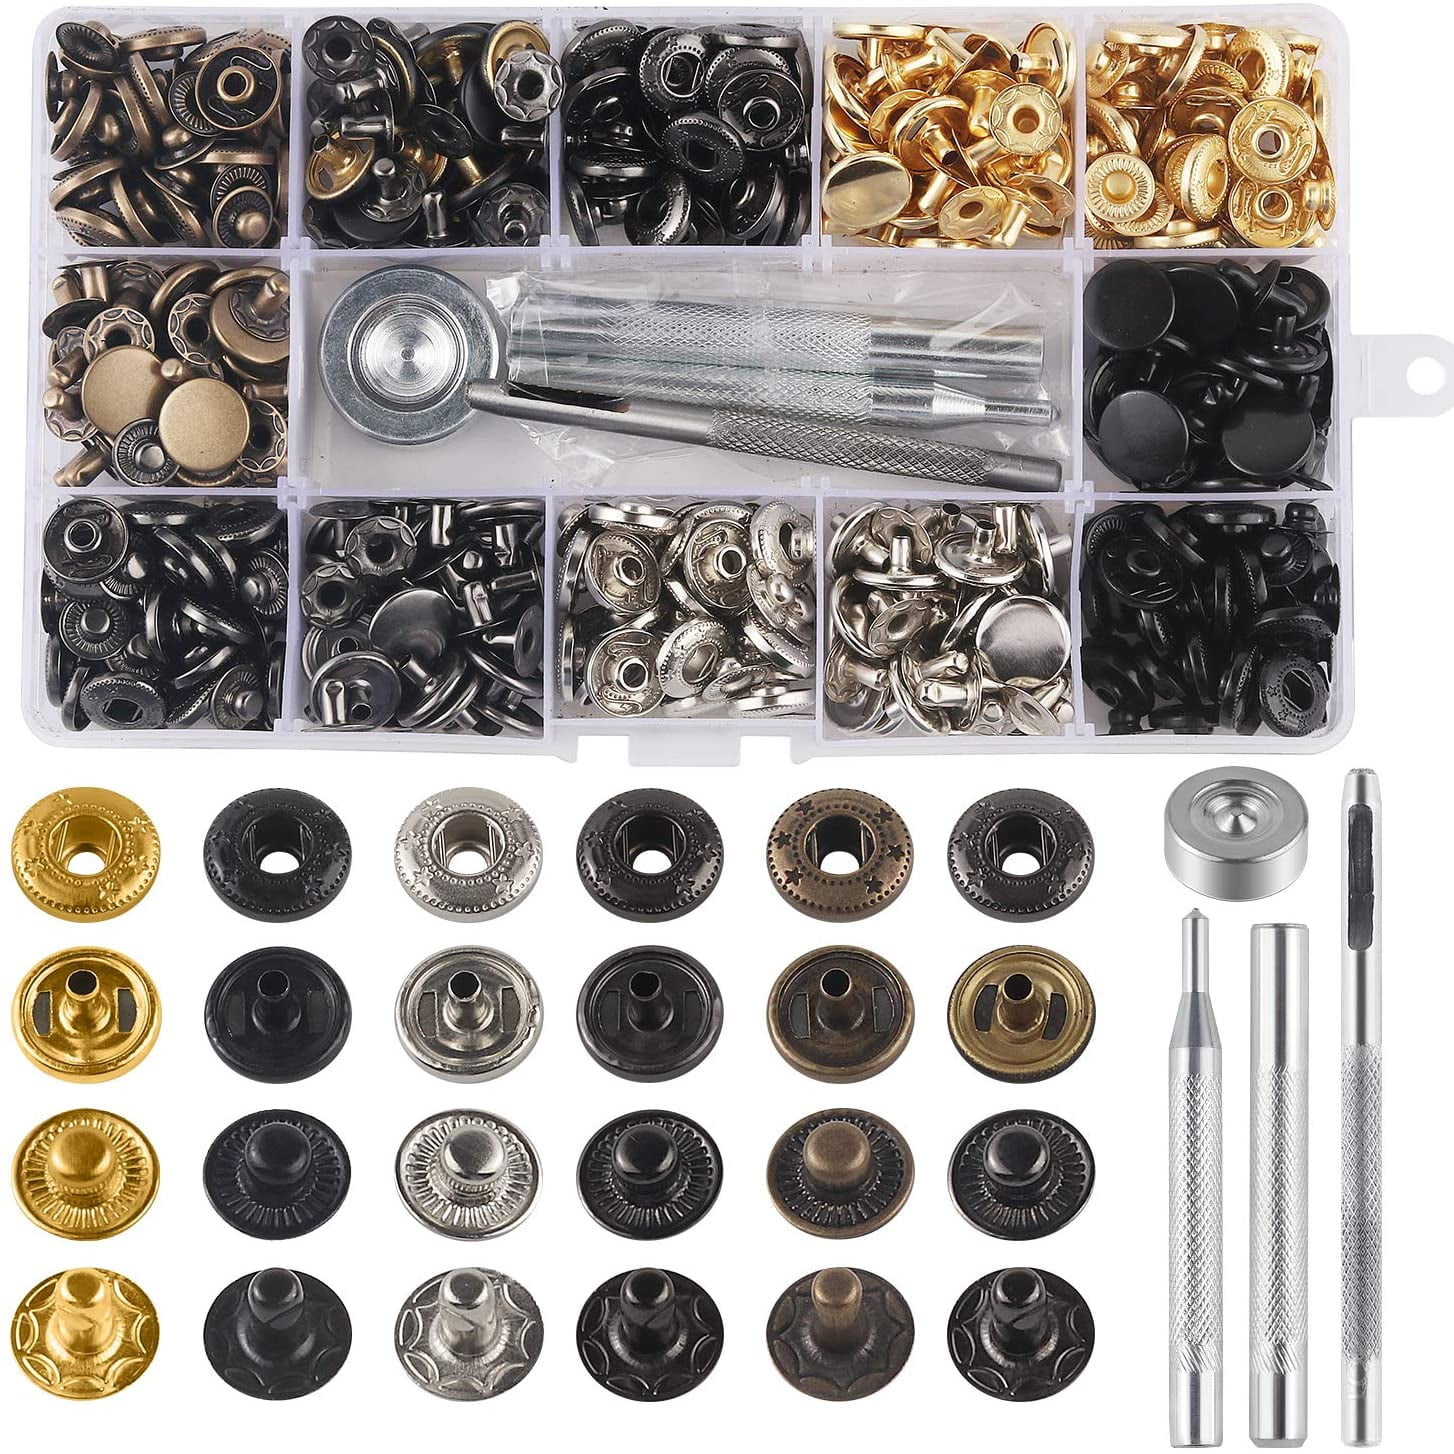 Leather Snap Fasteners Kit,10/12/15mm Metal Button Snaps Press